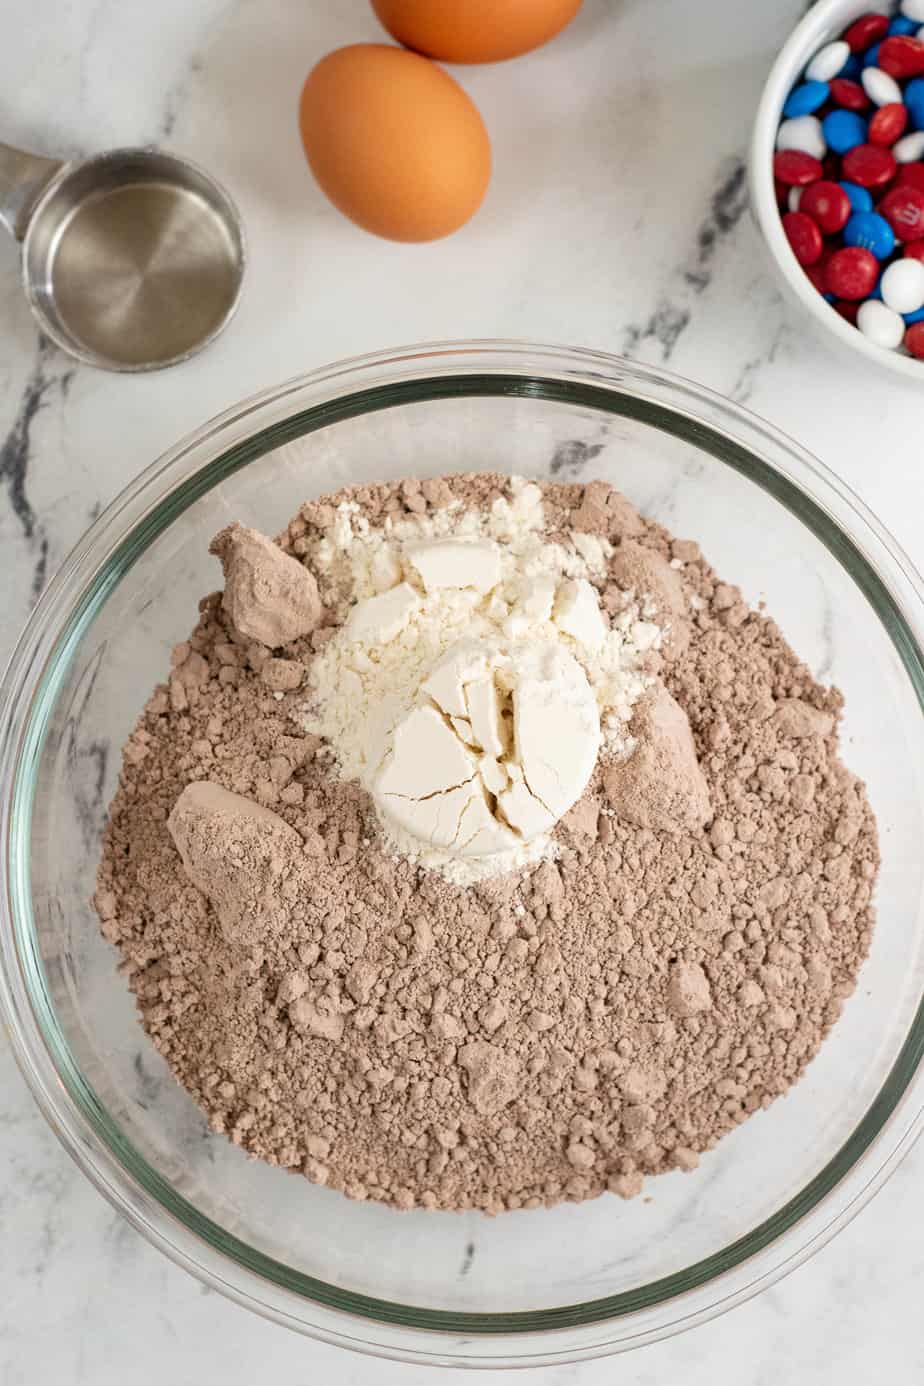 Mixing dry ingredients together in a bowl for brownie cookies from overhead with eggs and MMs in a bowl on the counter nearby.